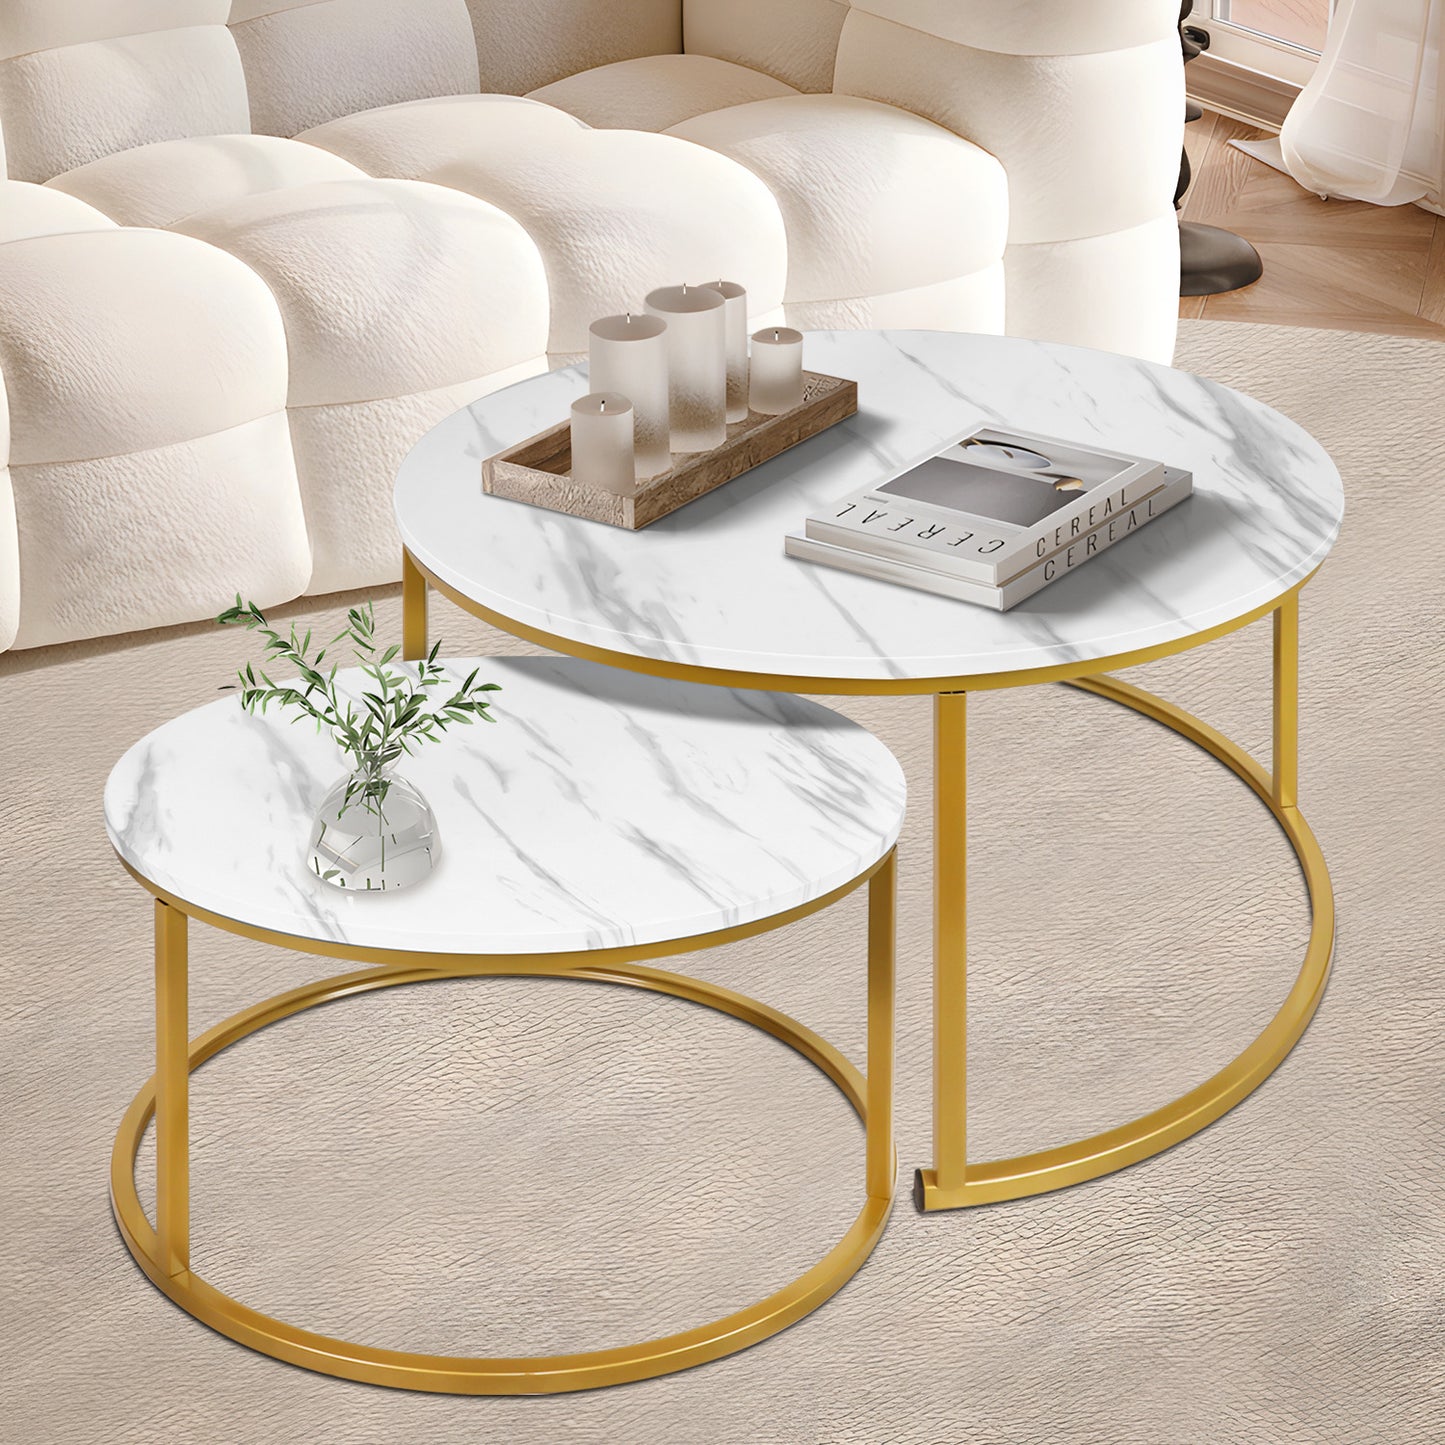 2-Piece Nesting Round Coffee Tables - Marbling Tabletop